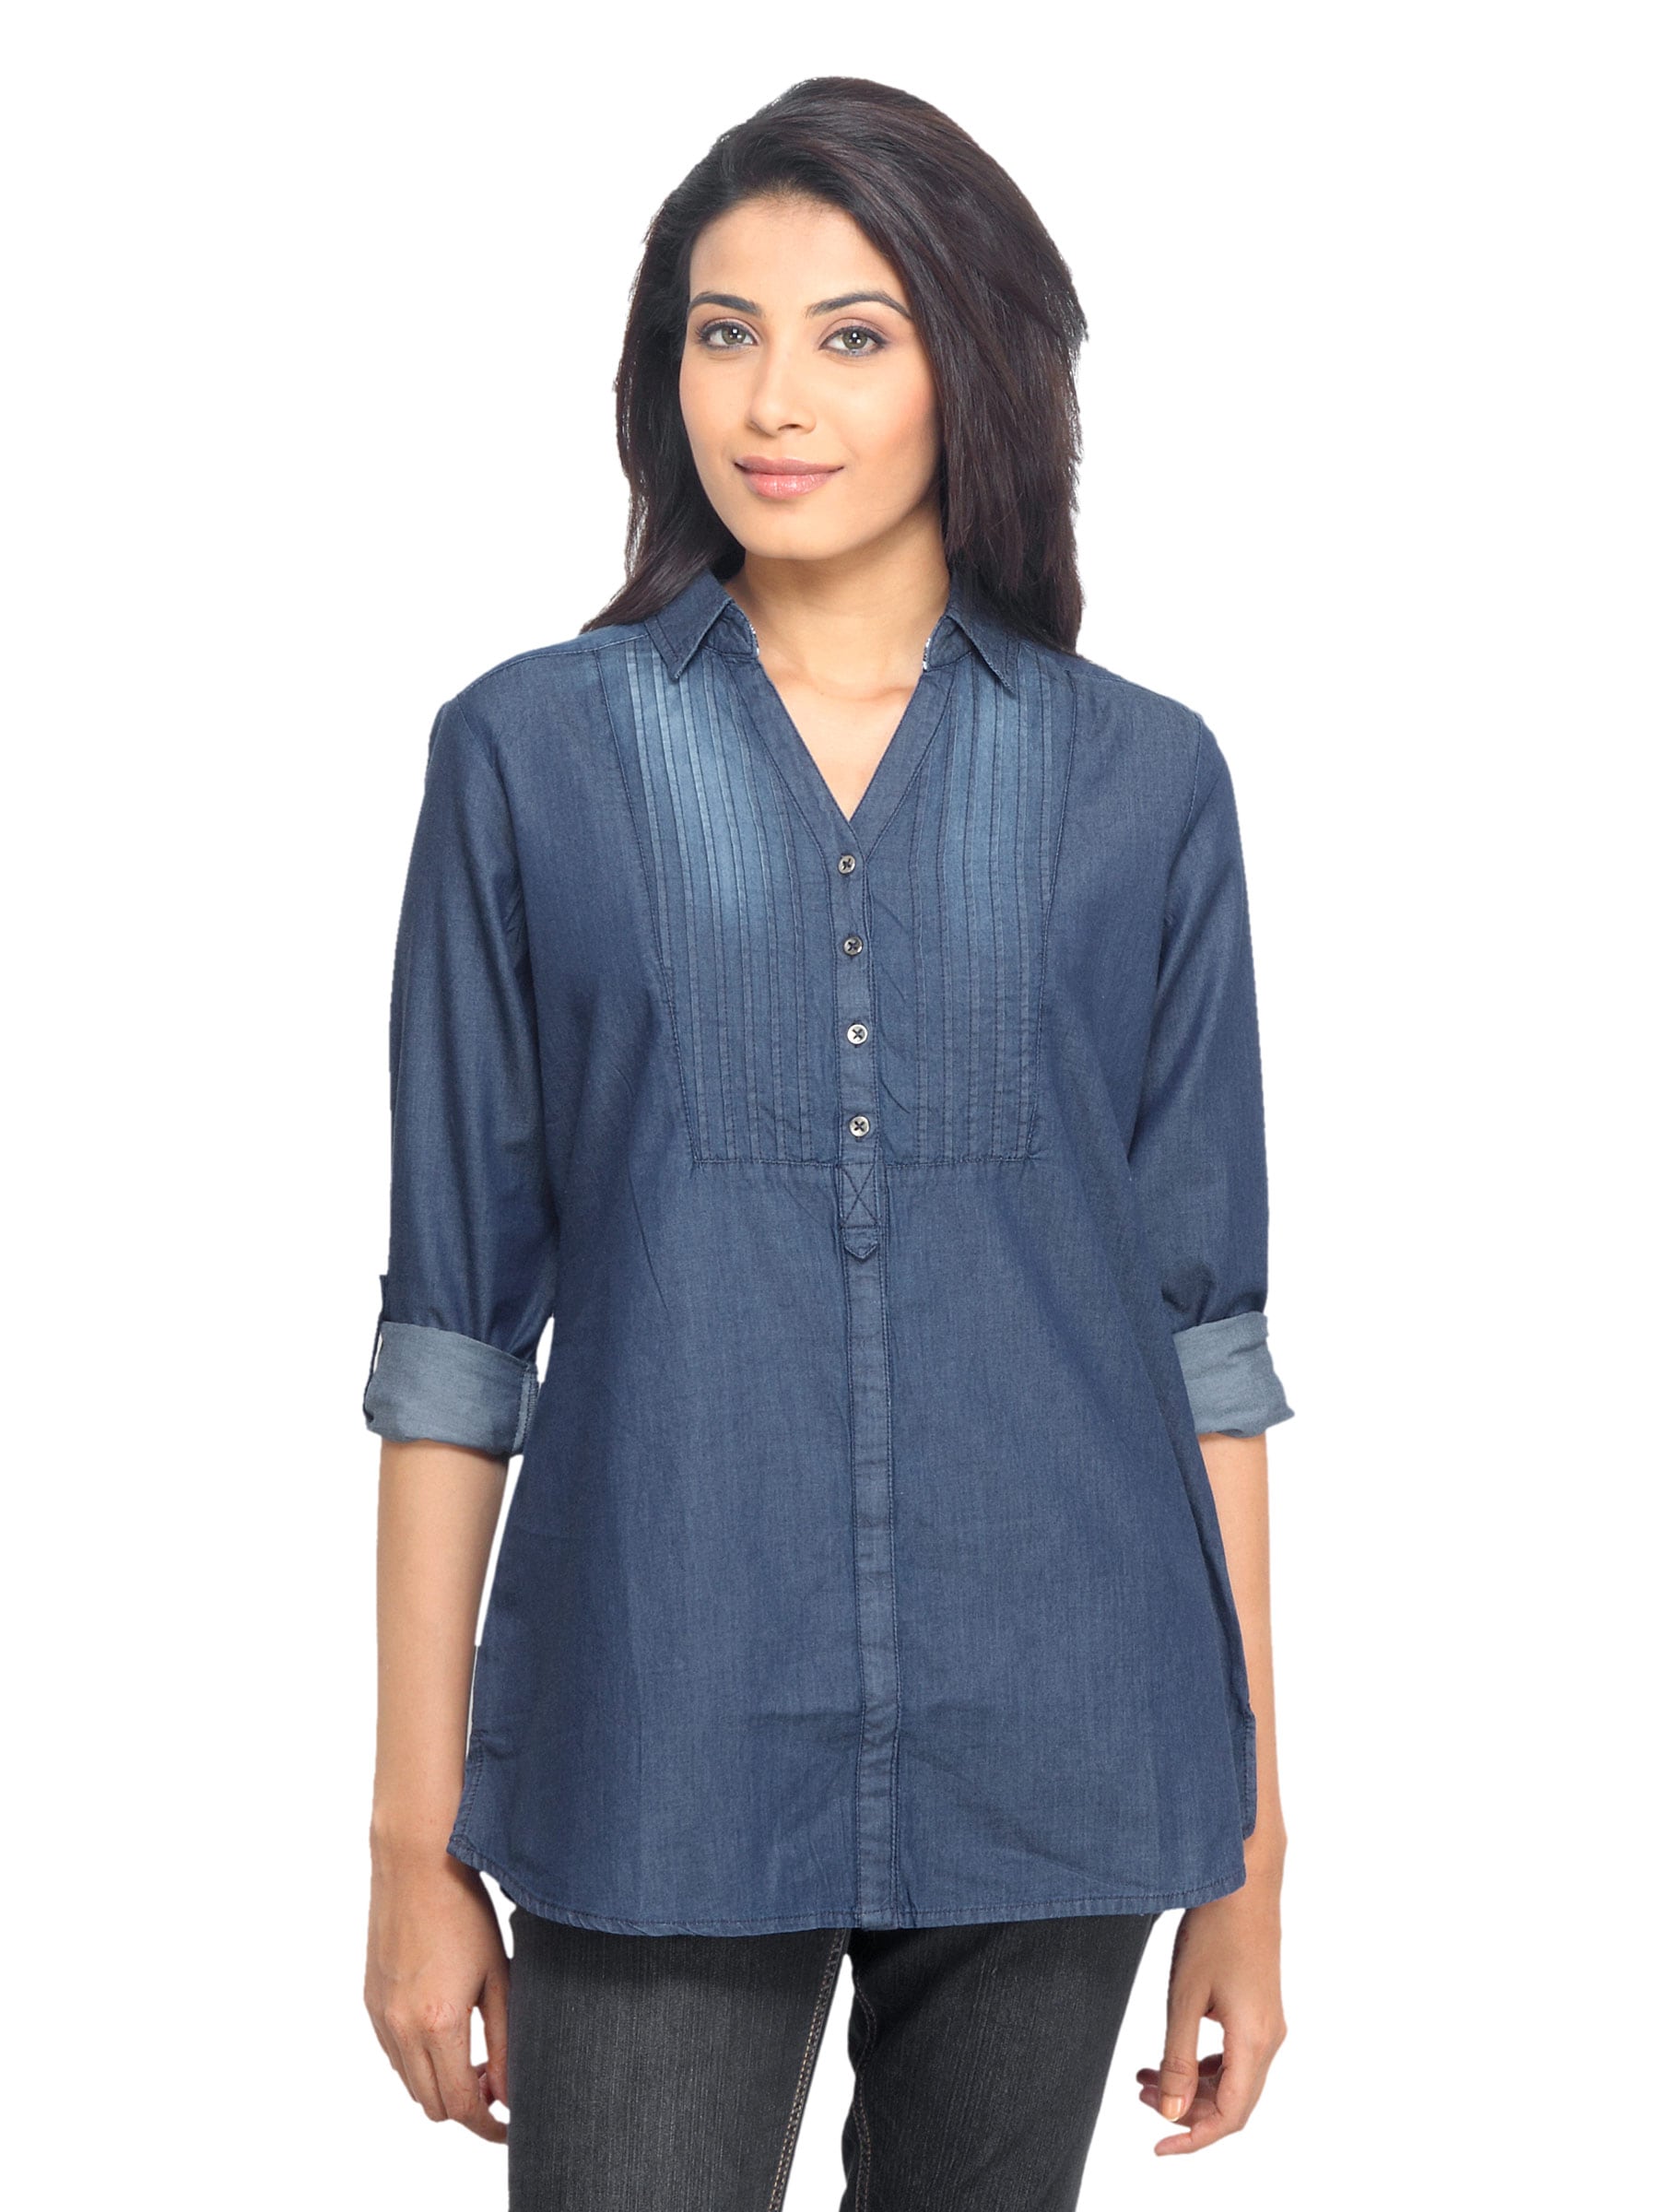 Scullers For Her Women Blue Top